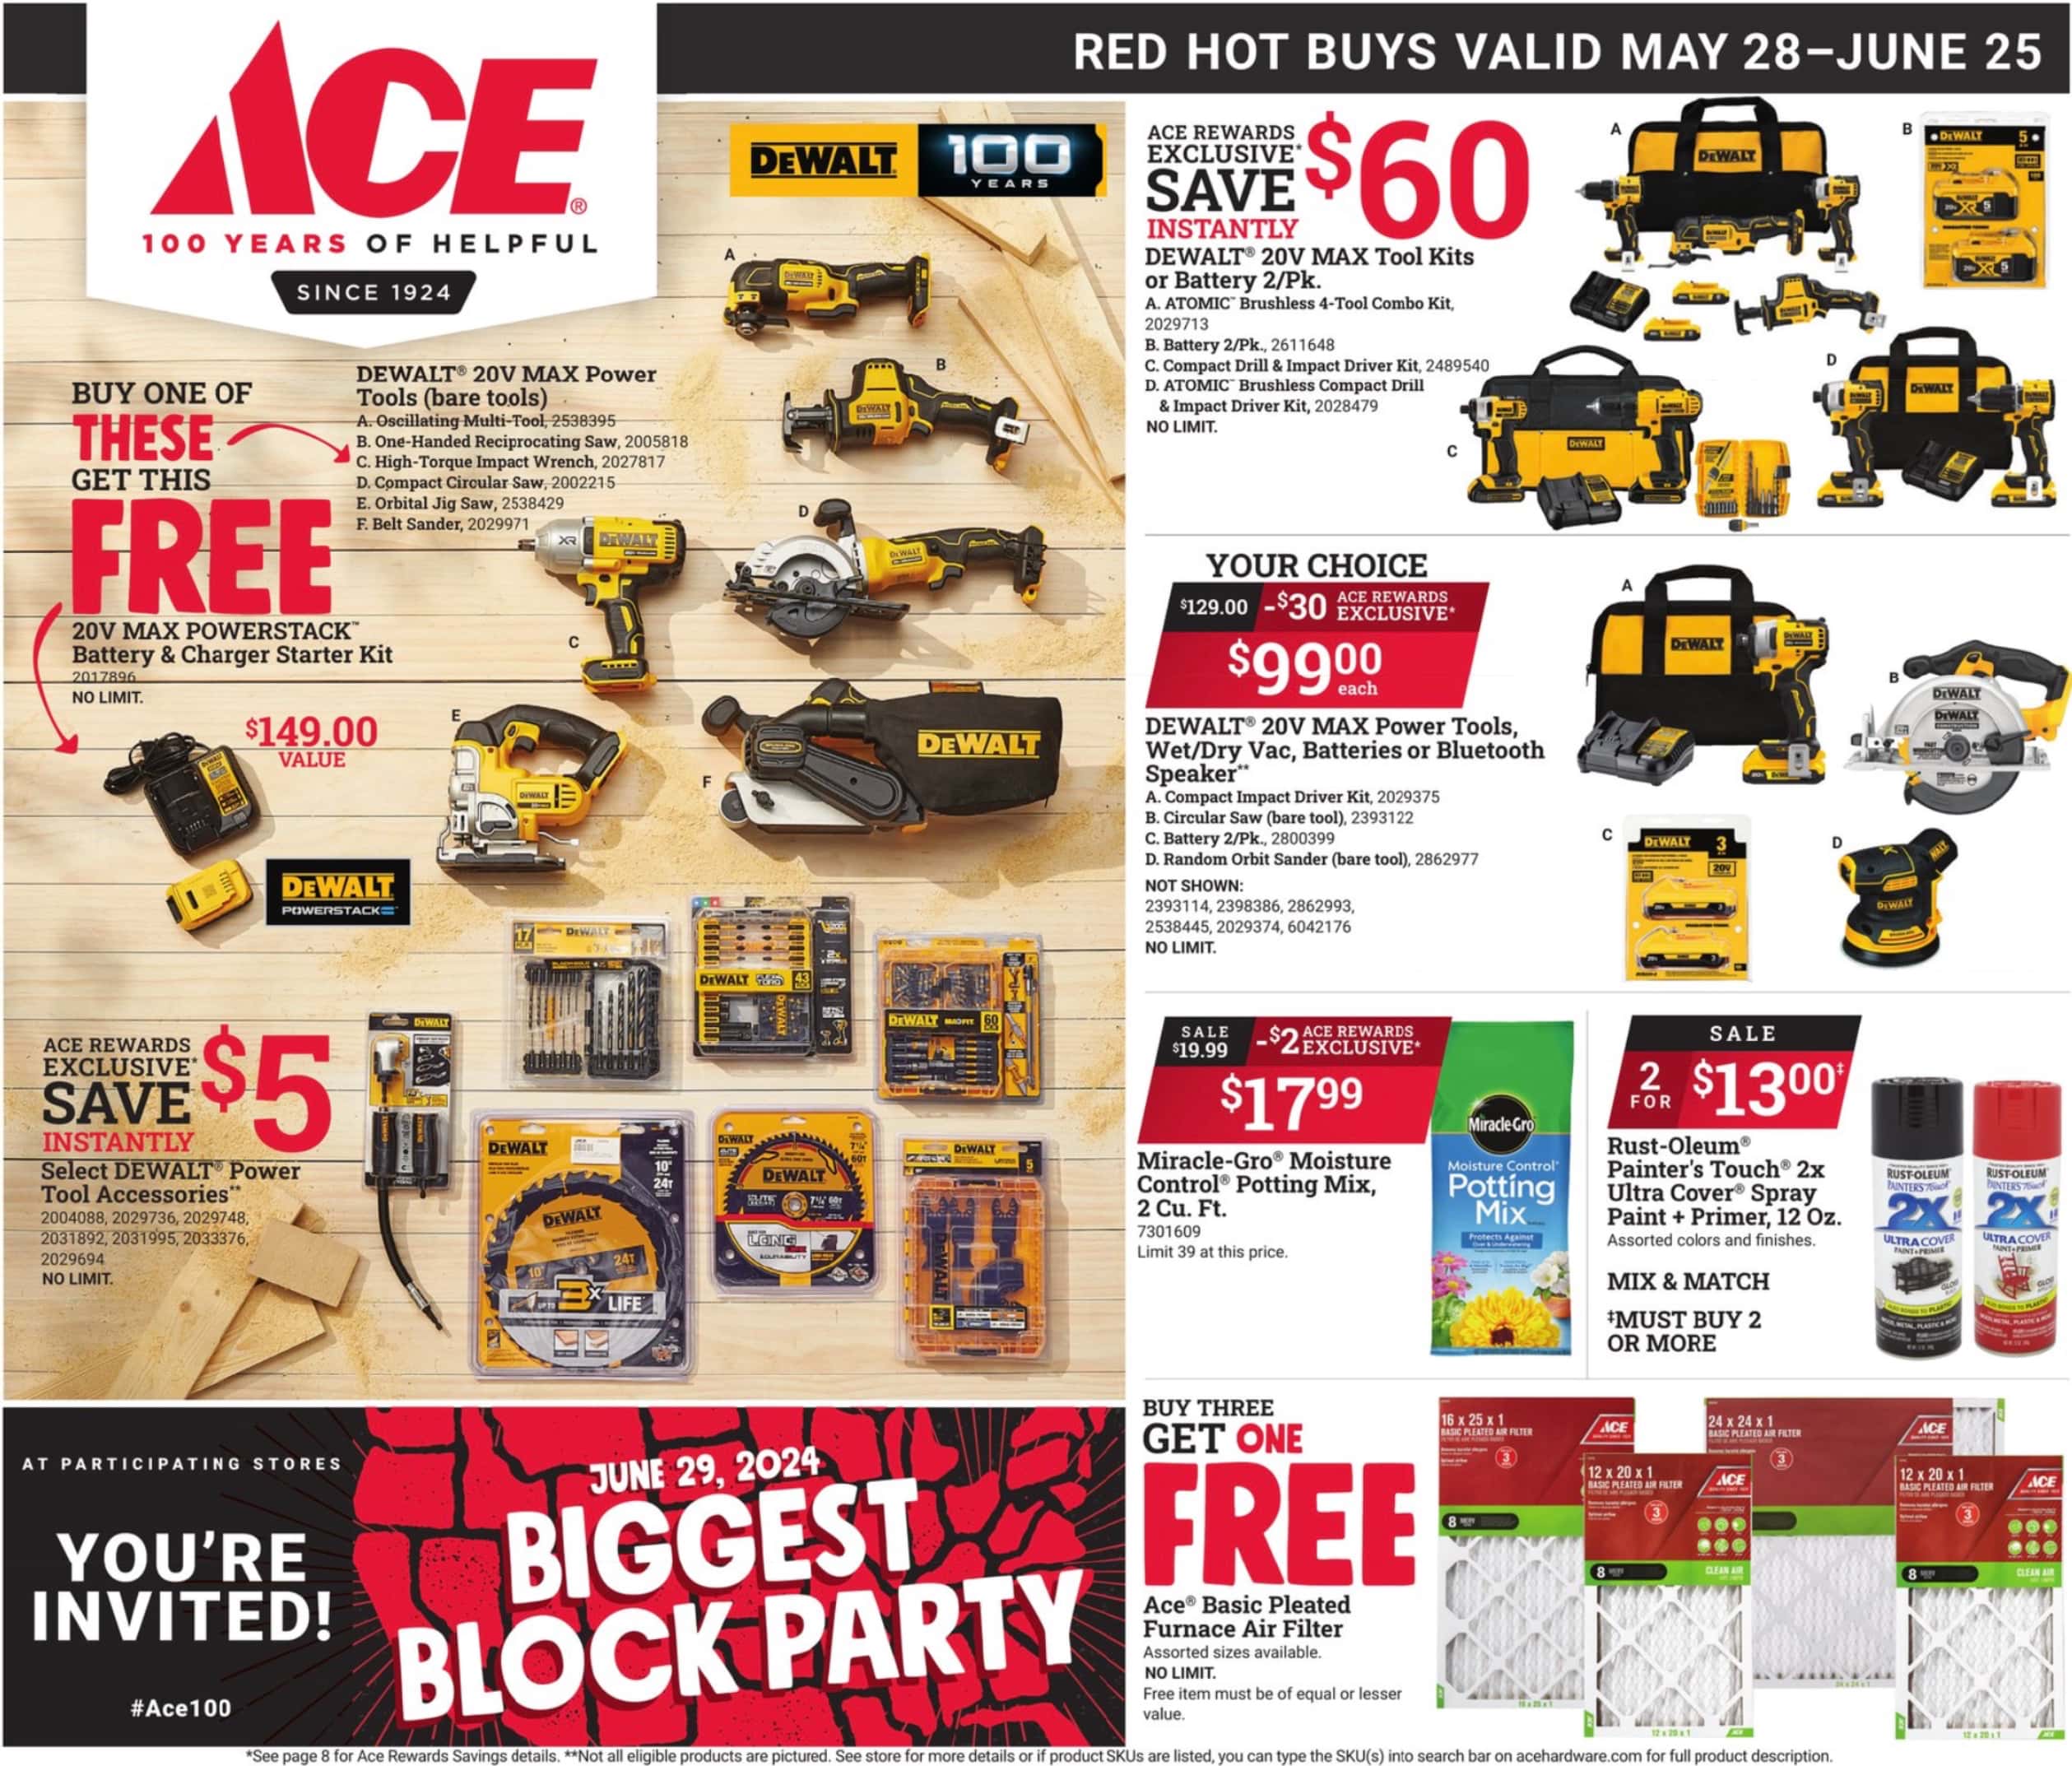 Ace Hardware July 2024 Weekly Sales, Deals, Discounts and Digital Coupons.